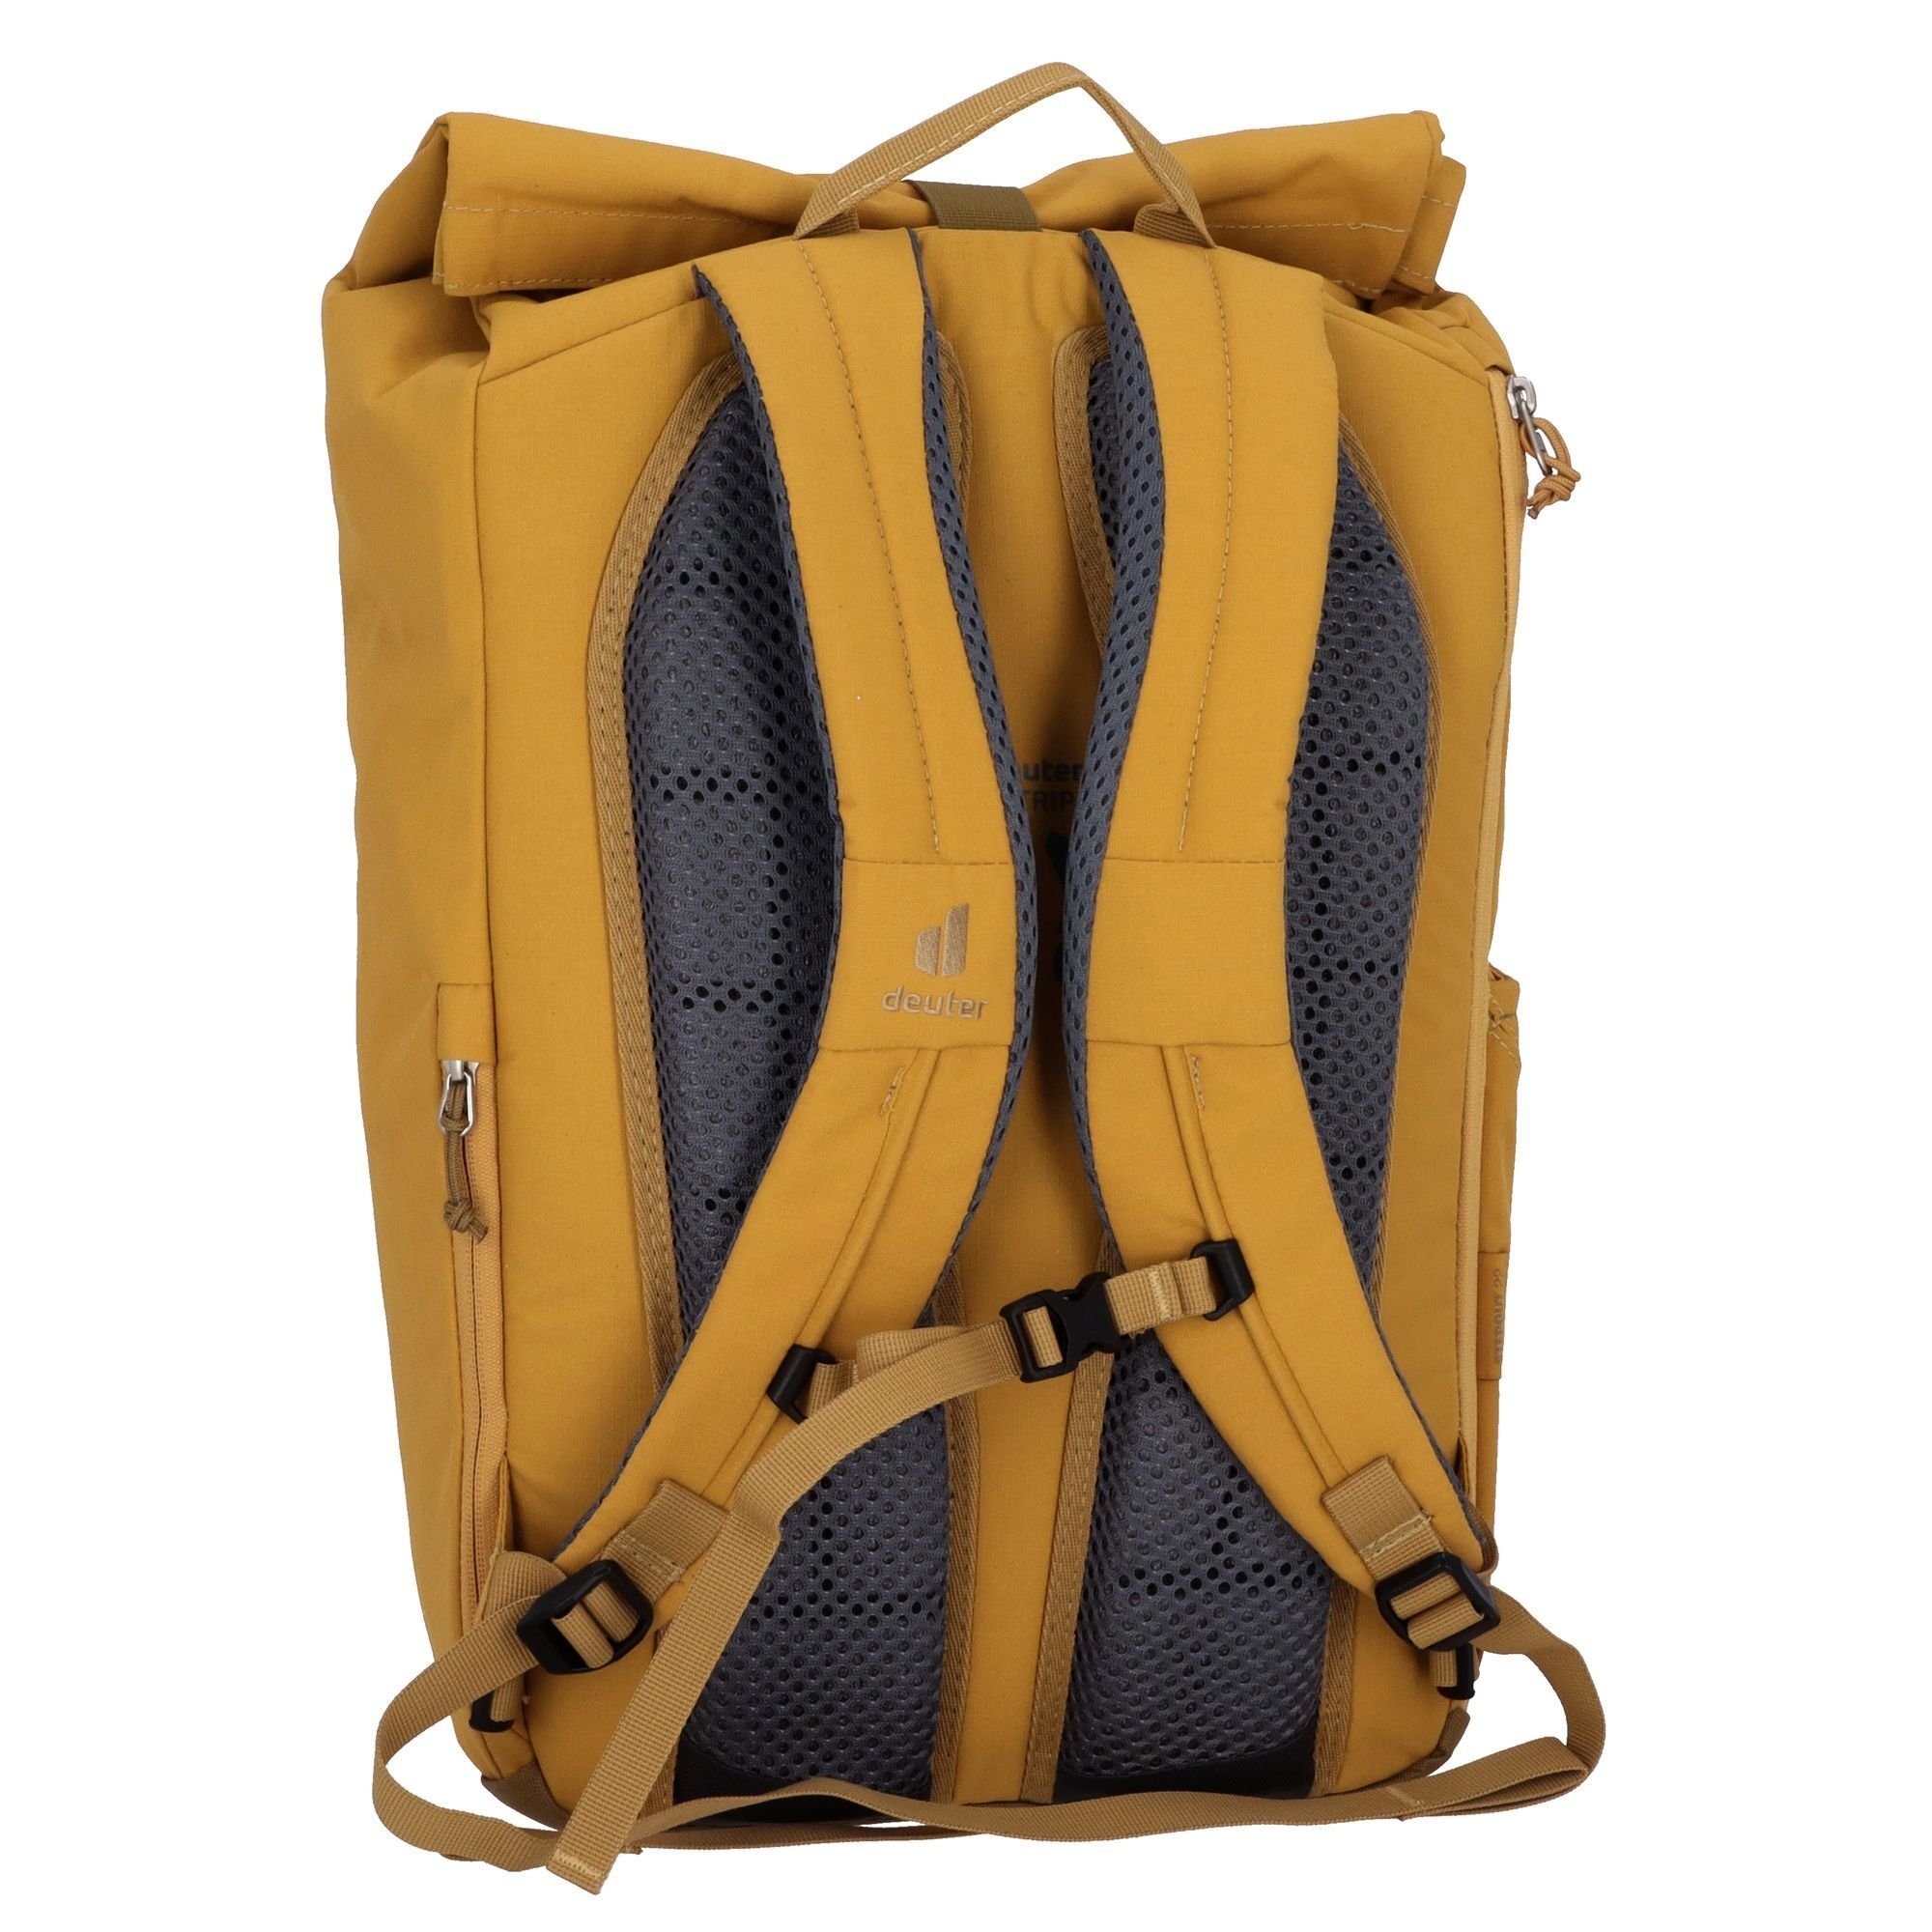 Daypack caramel-clay deuter Polyester Stepout,